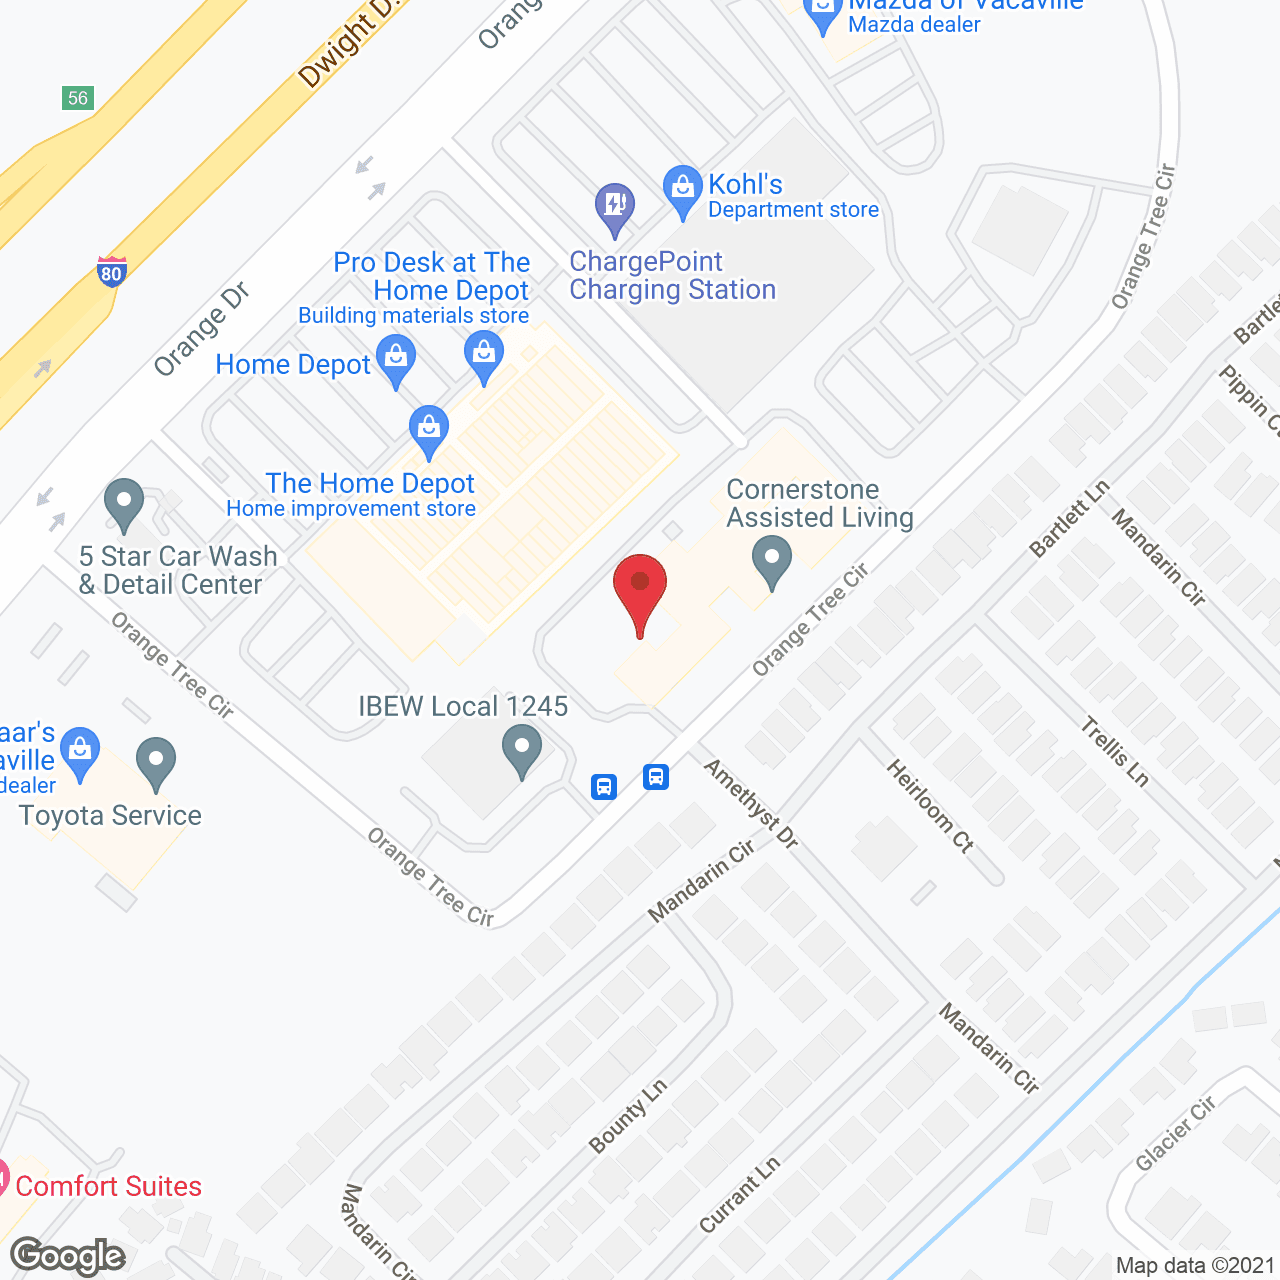 Cornerstone Assisted Living in google map